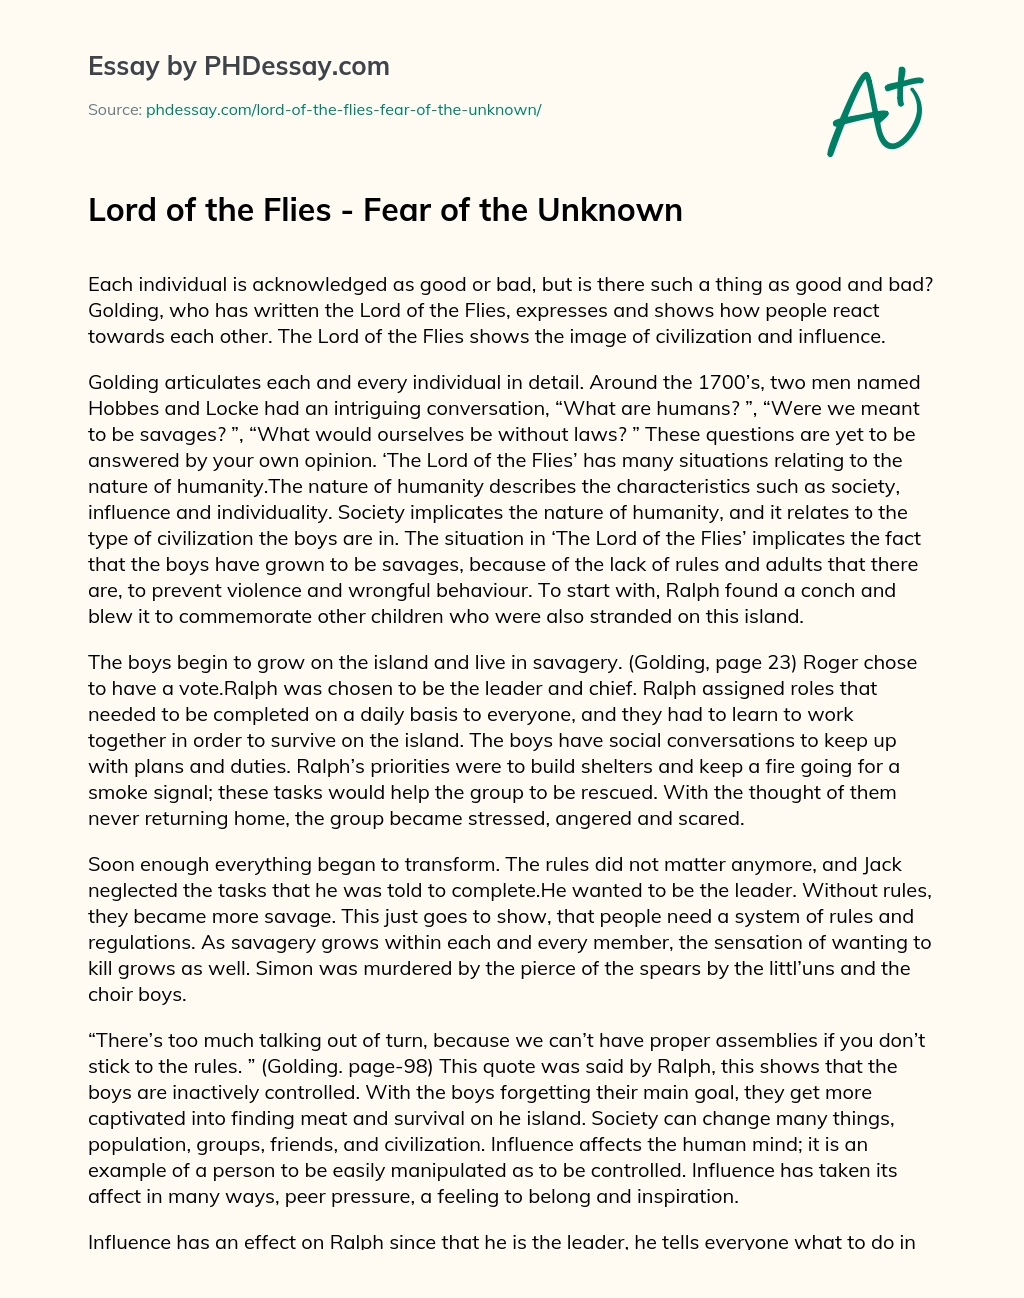 fear of the unknown lord of the flies essay